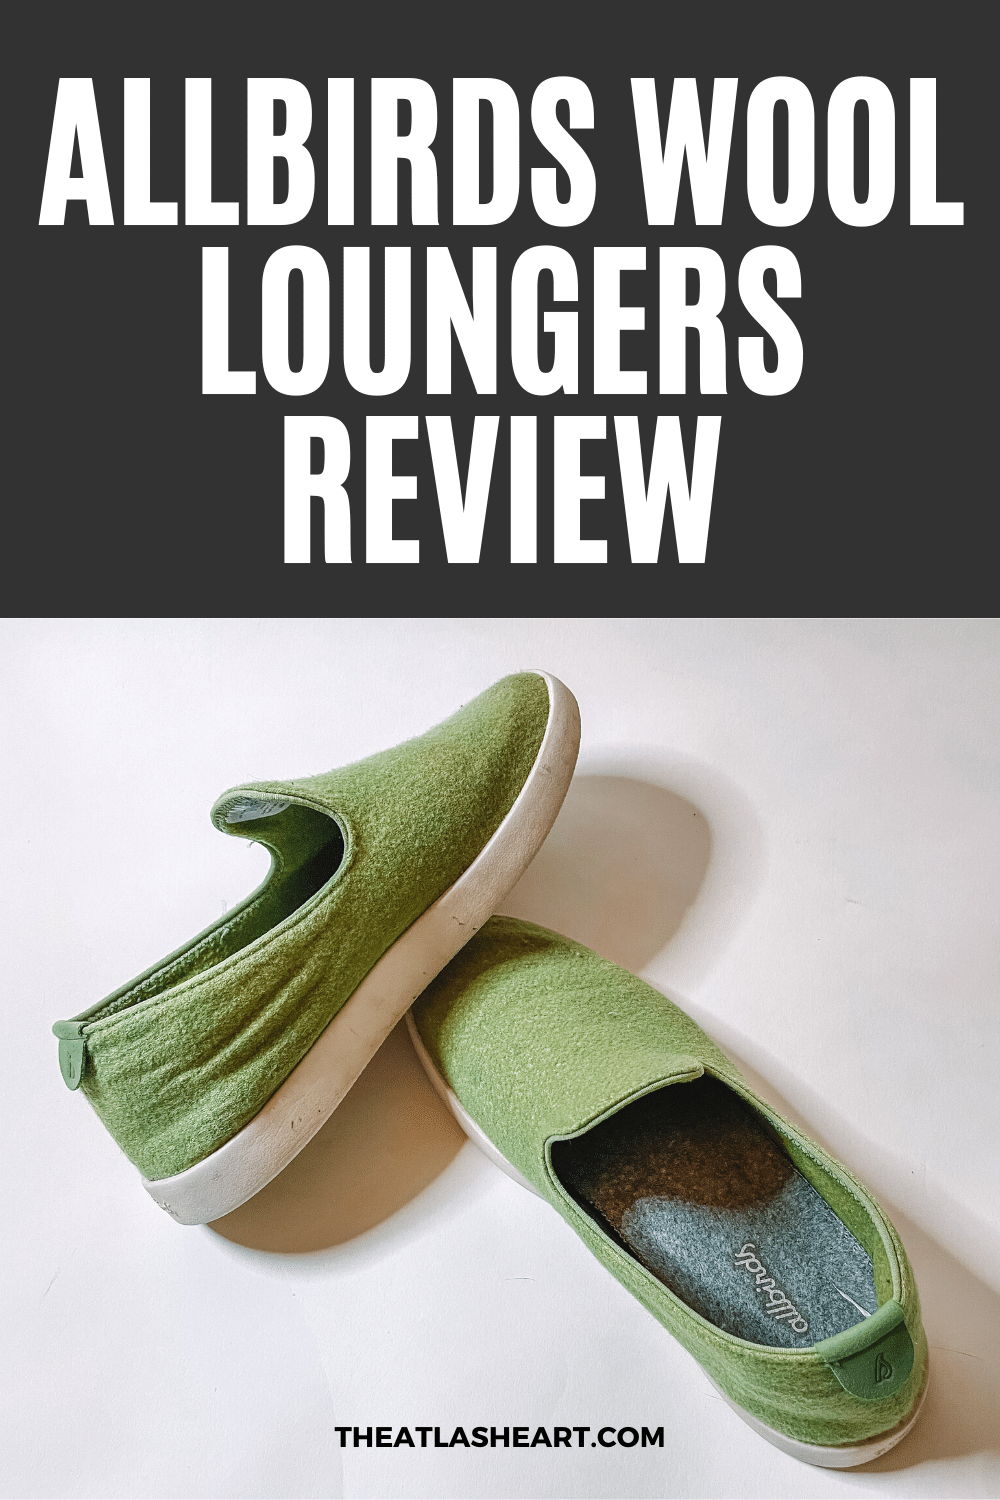 Allbirds Wool Loungers Review for 2023: Are They Worth the Cost?